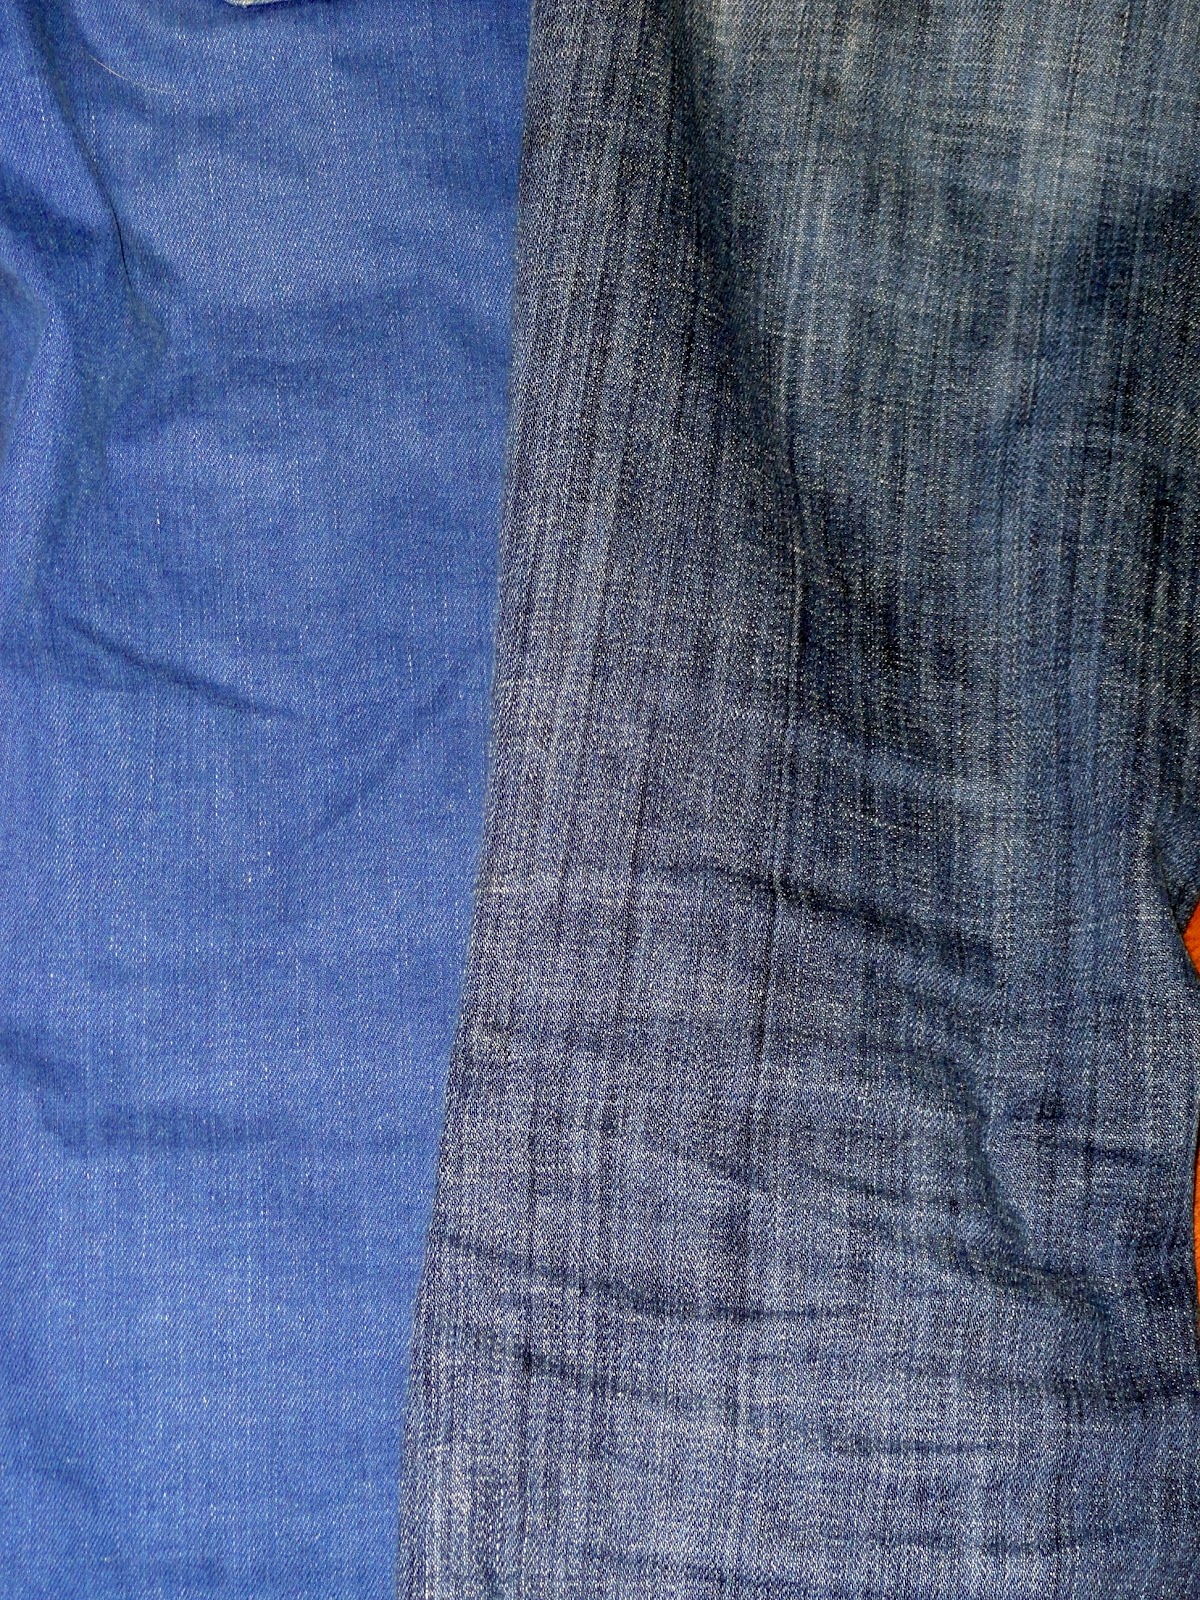 How to Redye Jeans